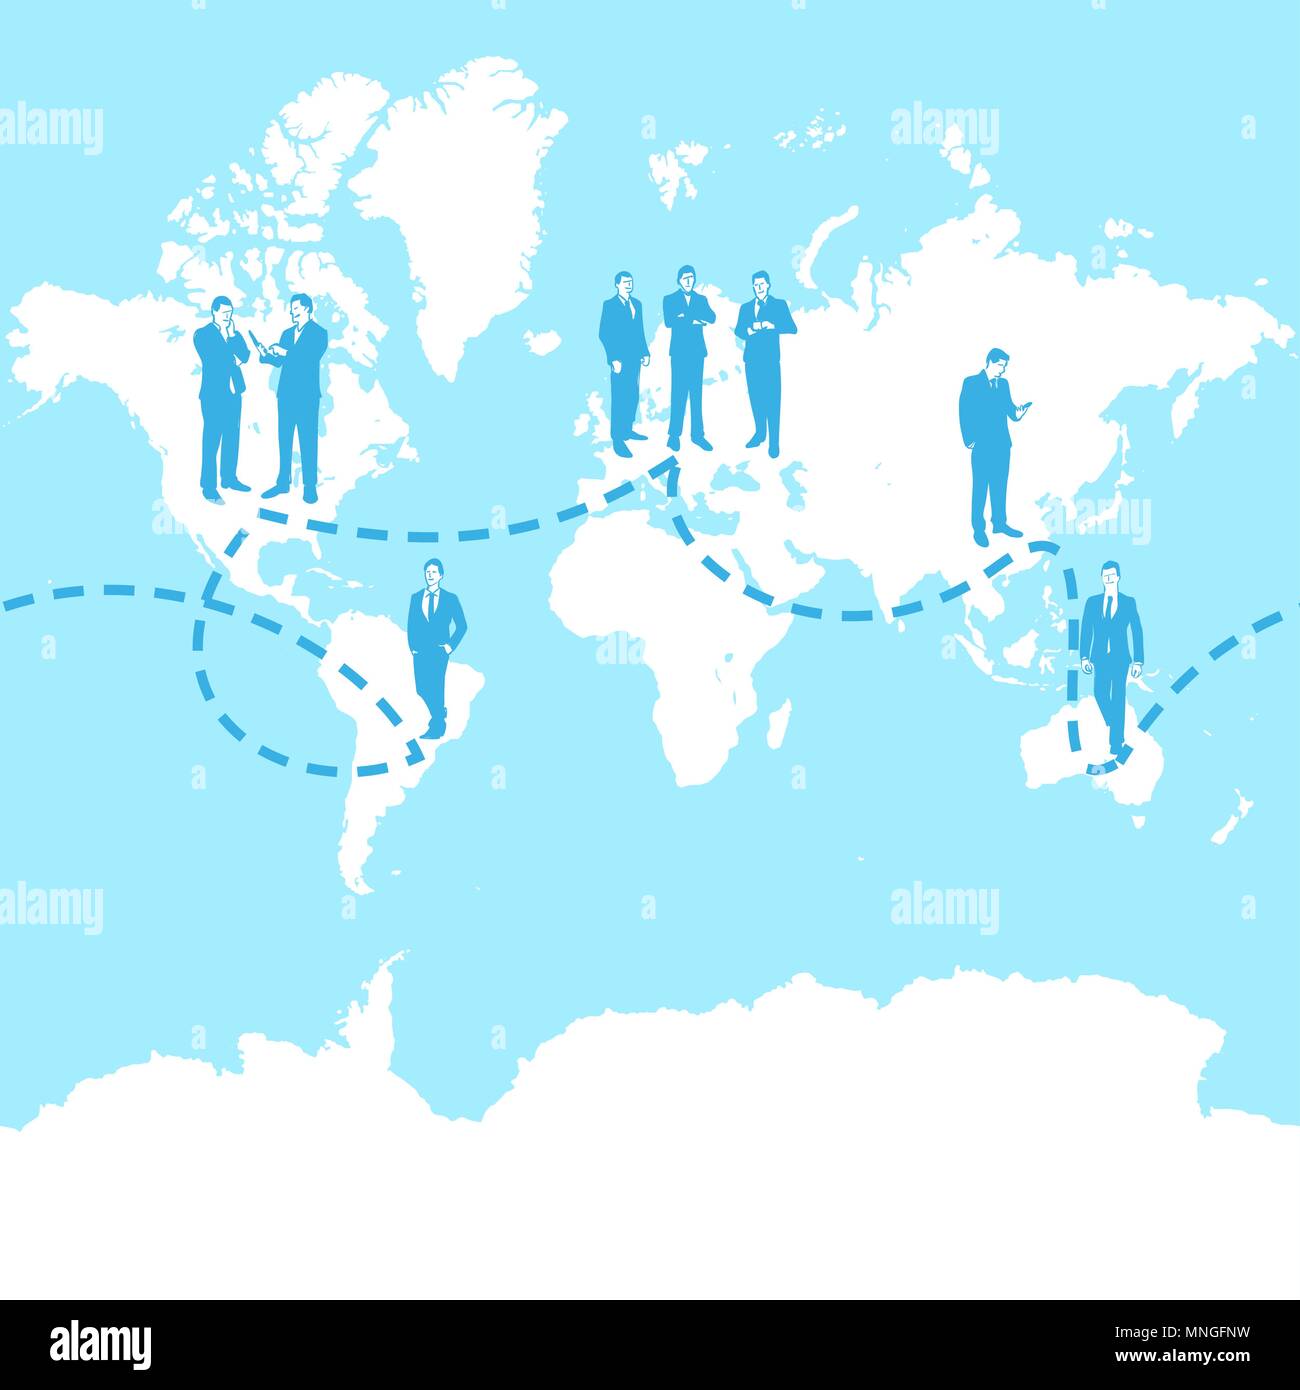 globalization business concept illustration, map with business man icons Stock Vector